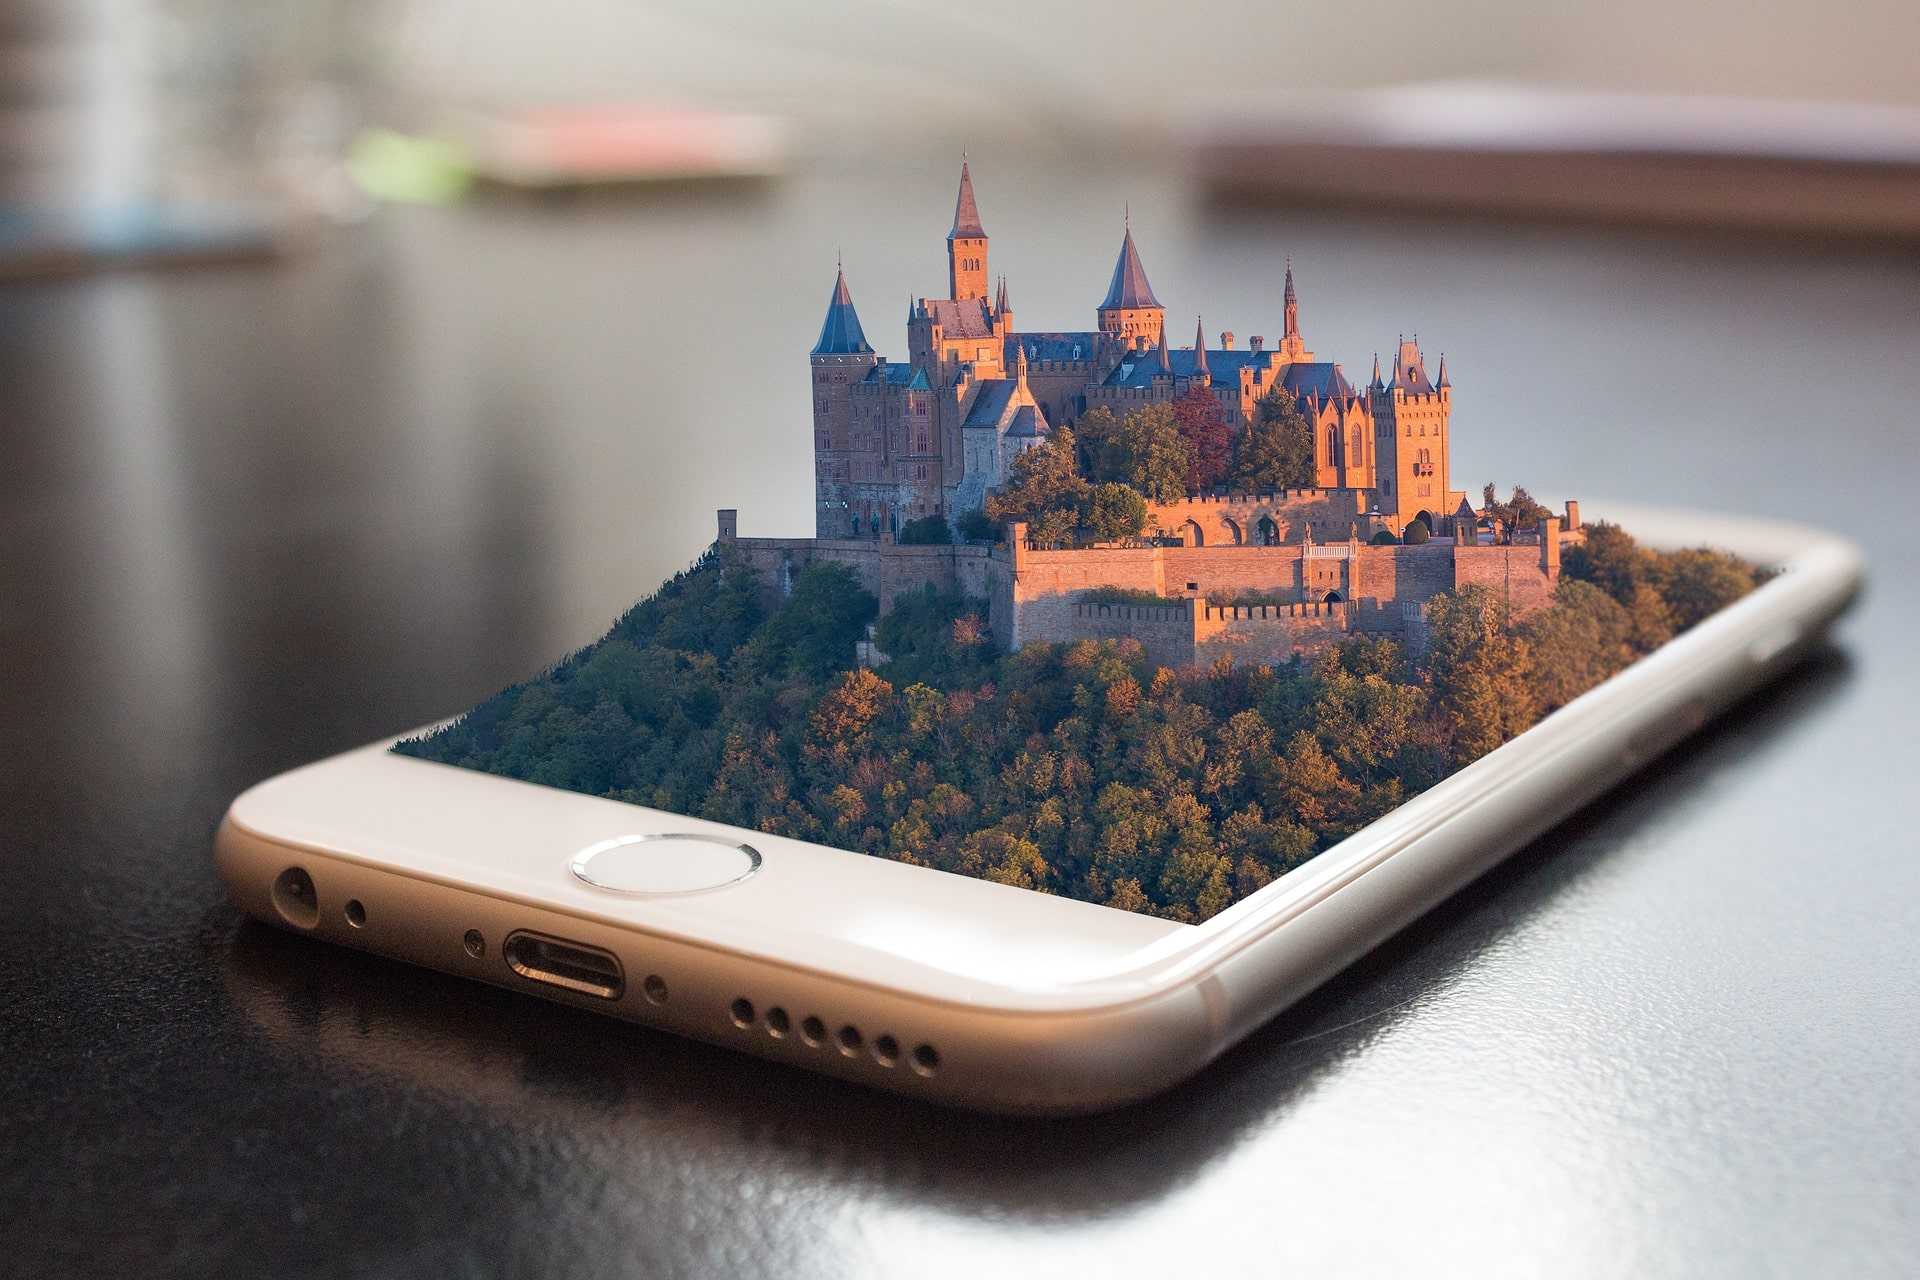 An overgrown castle contained in the screen of a phone.